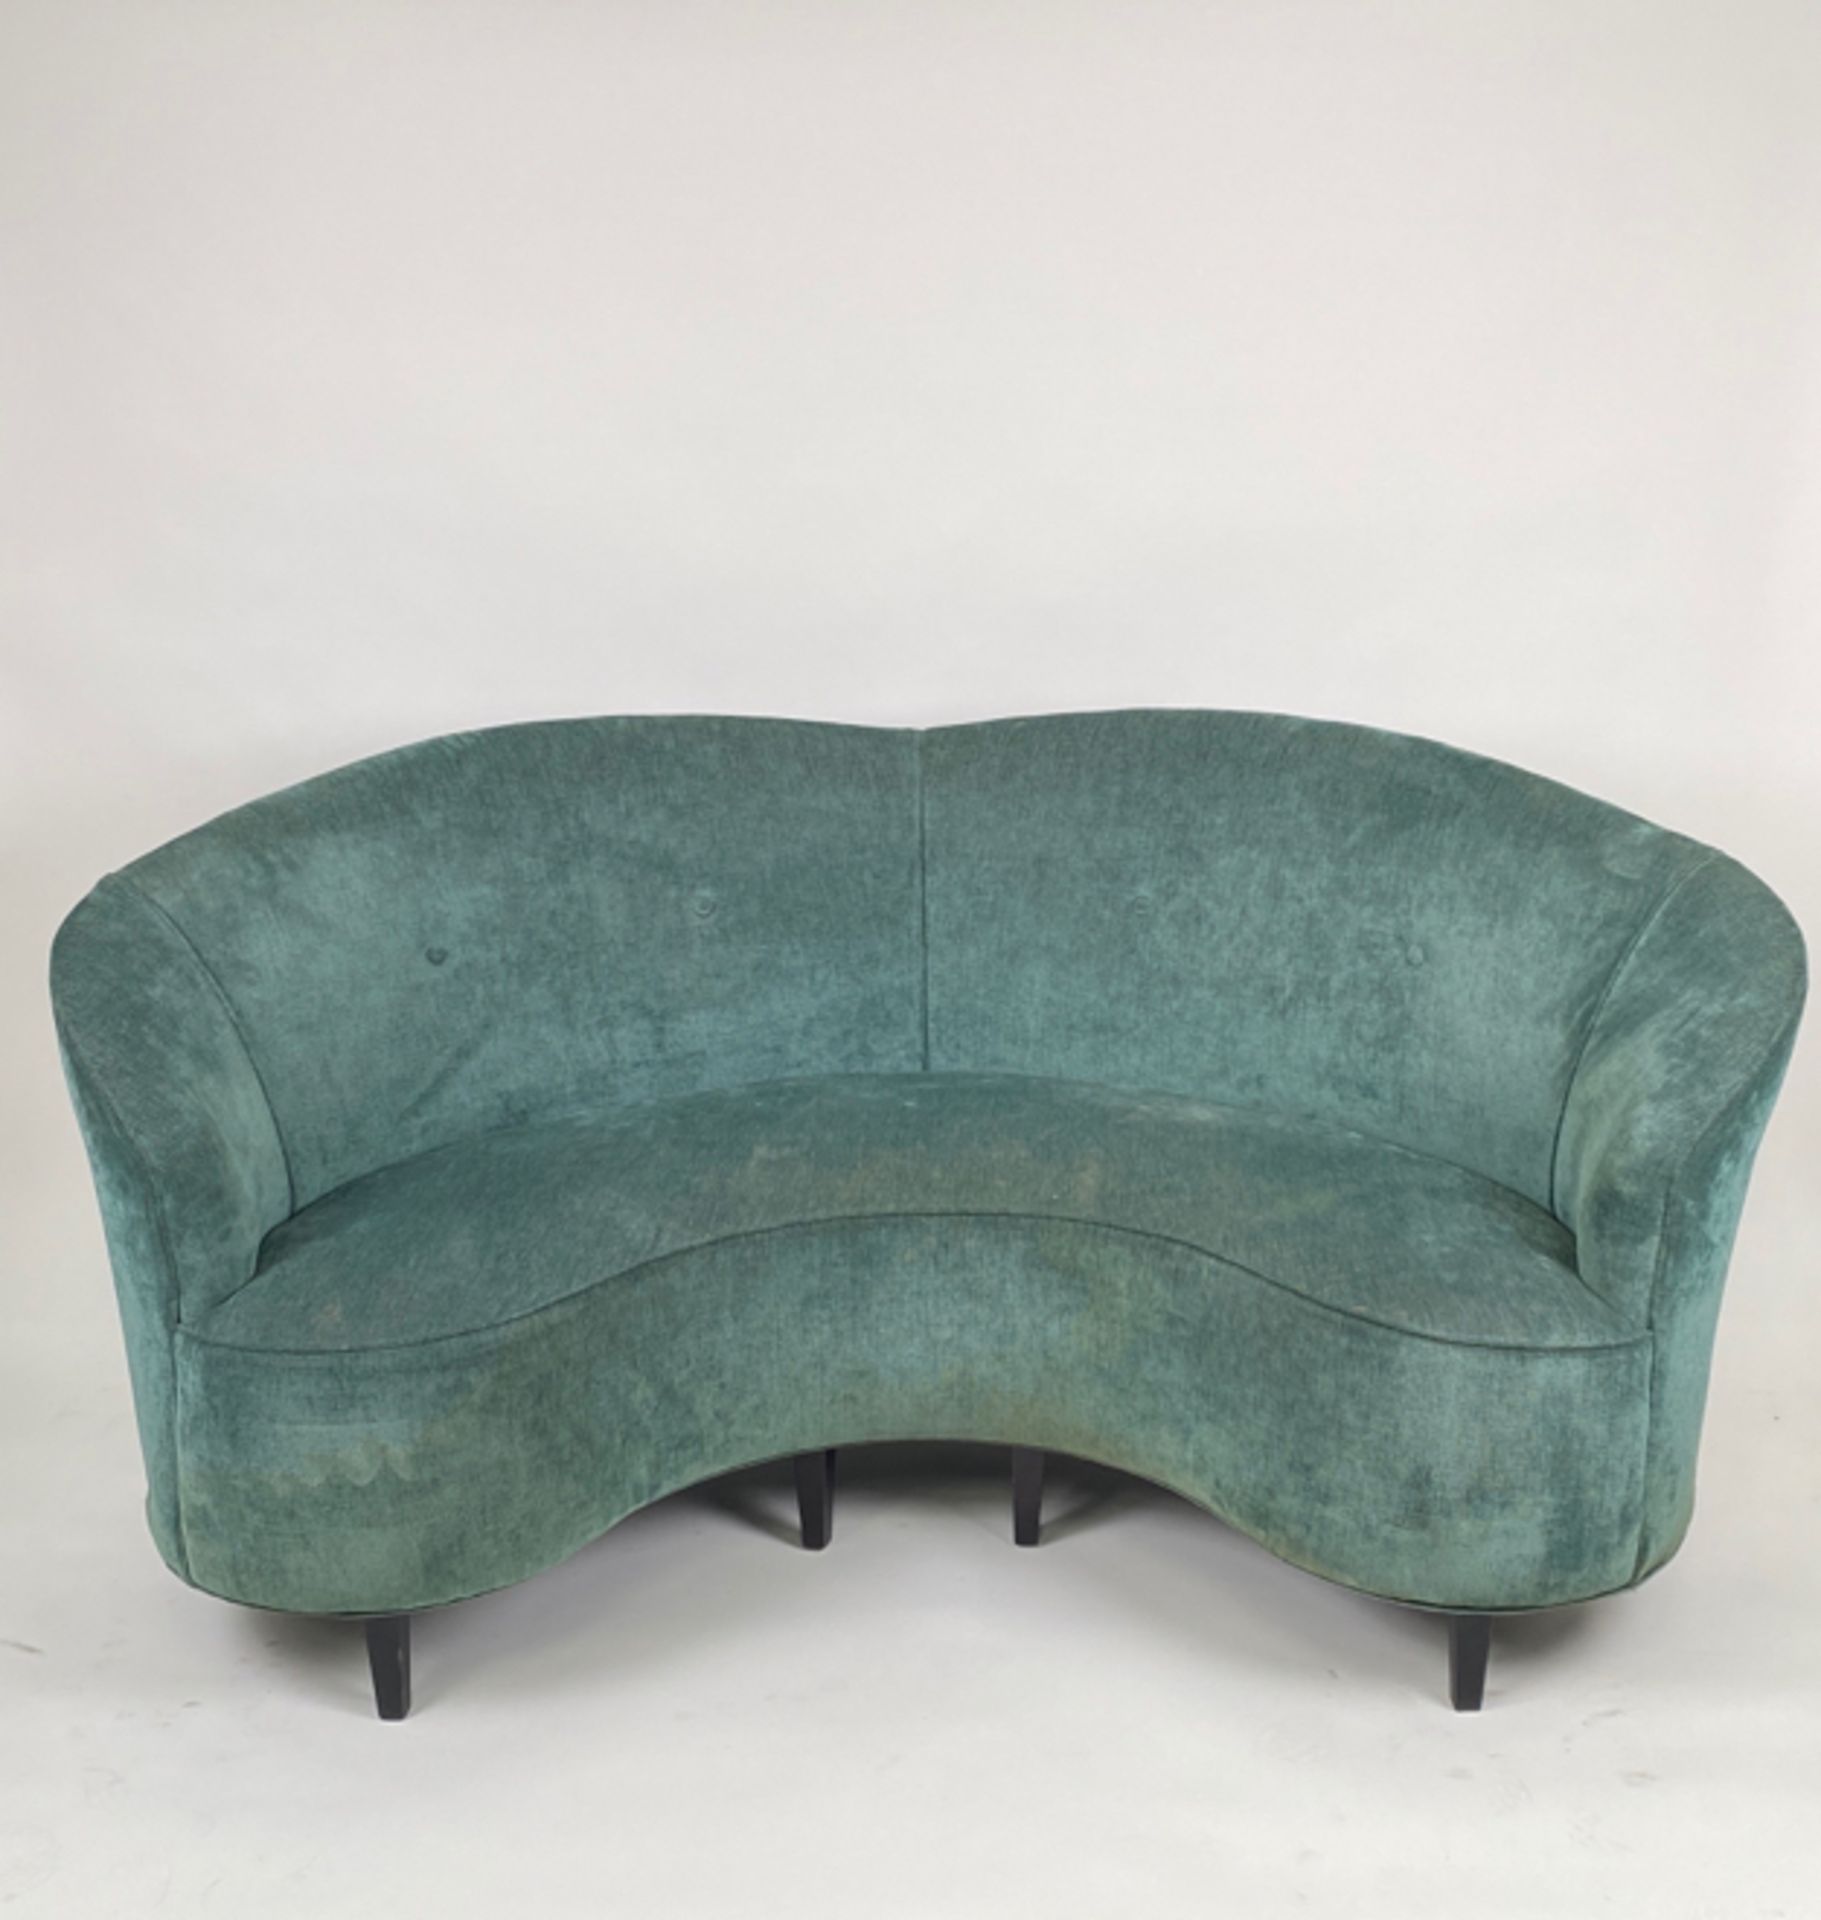 Curved Teal Sofa - Image 3 of 5